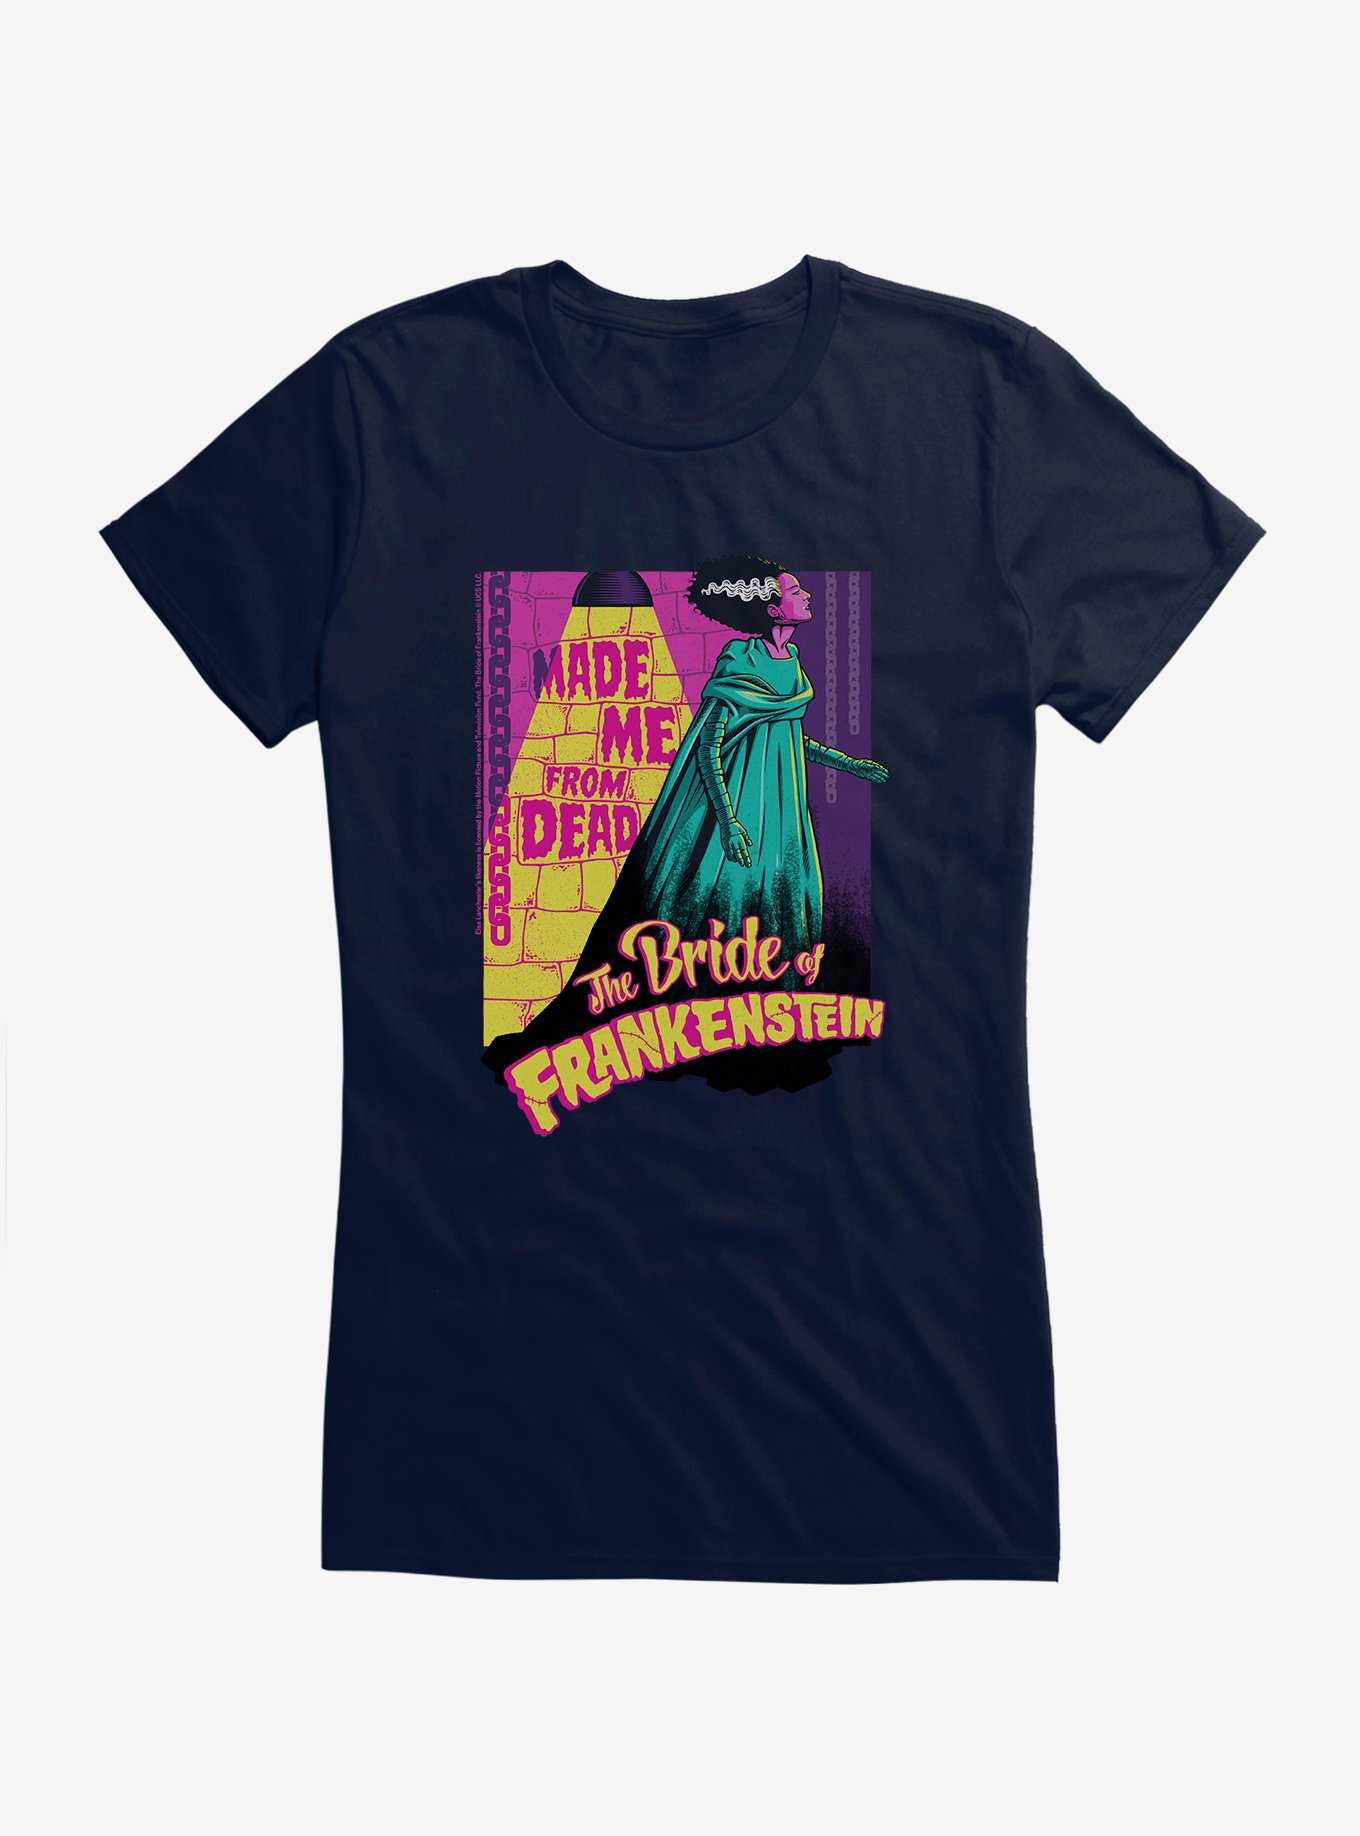 Bride of Frankenstein Made Me From The Dead Girls T-Shirt, NAVY, hi-res